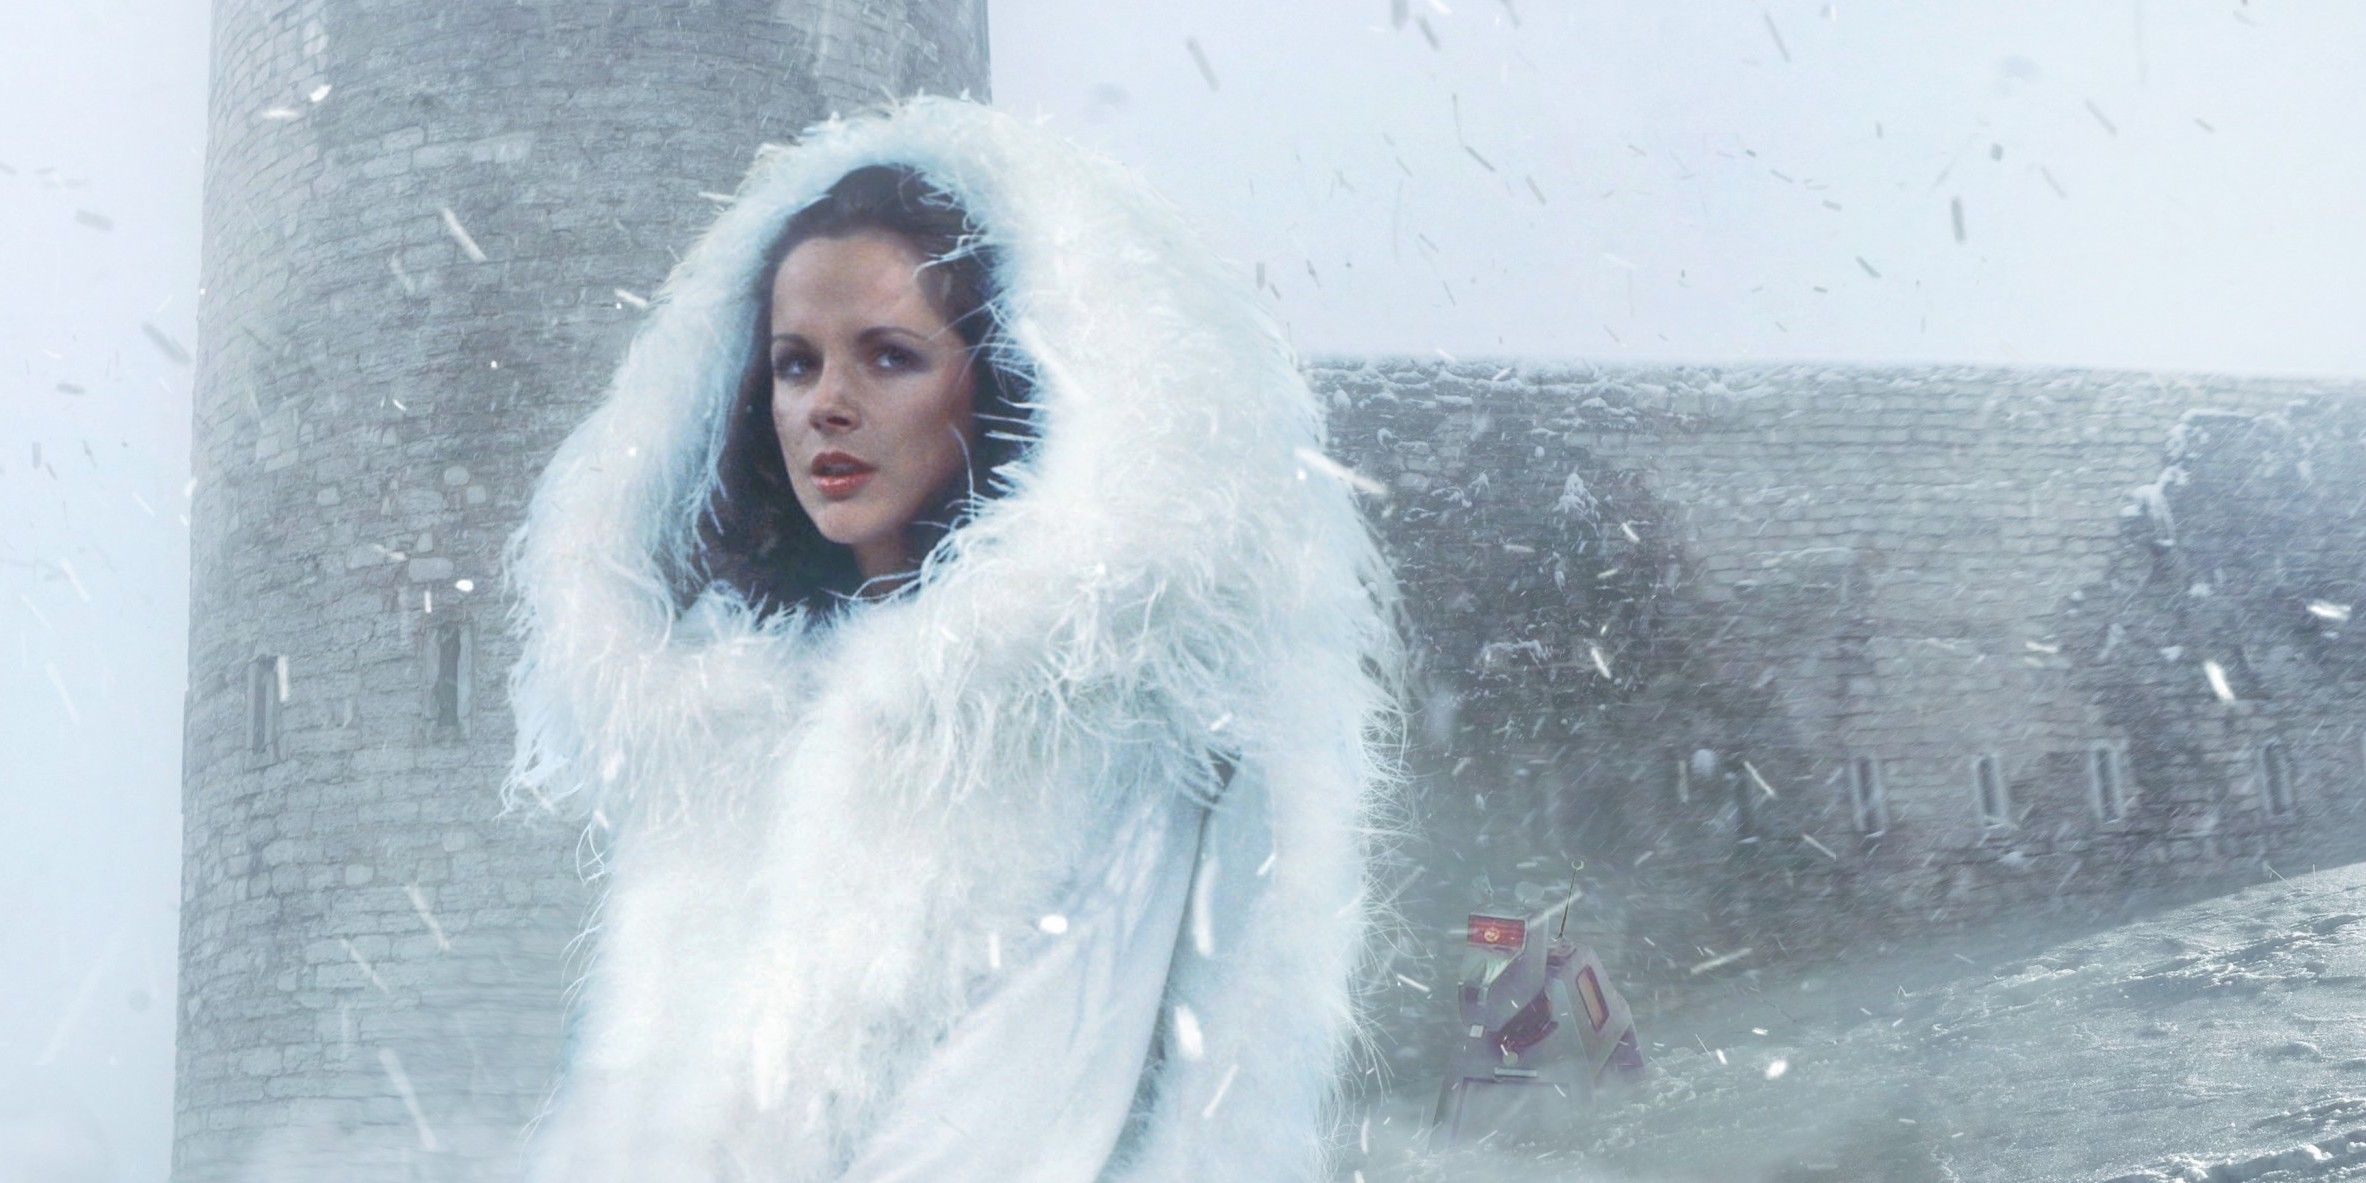 An image of Doctor Who's Romana I standing in a snowy landscape while wearing a large fur coat. K-9 is in the background.